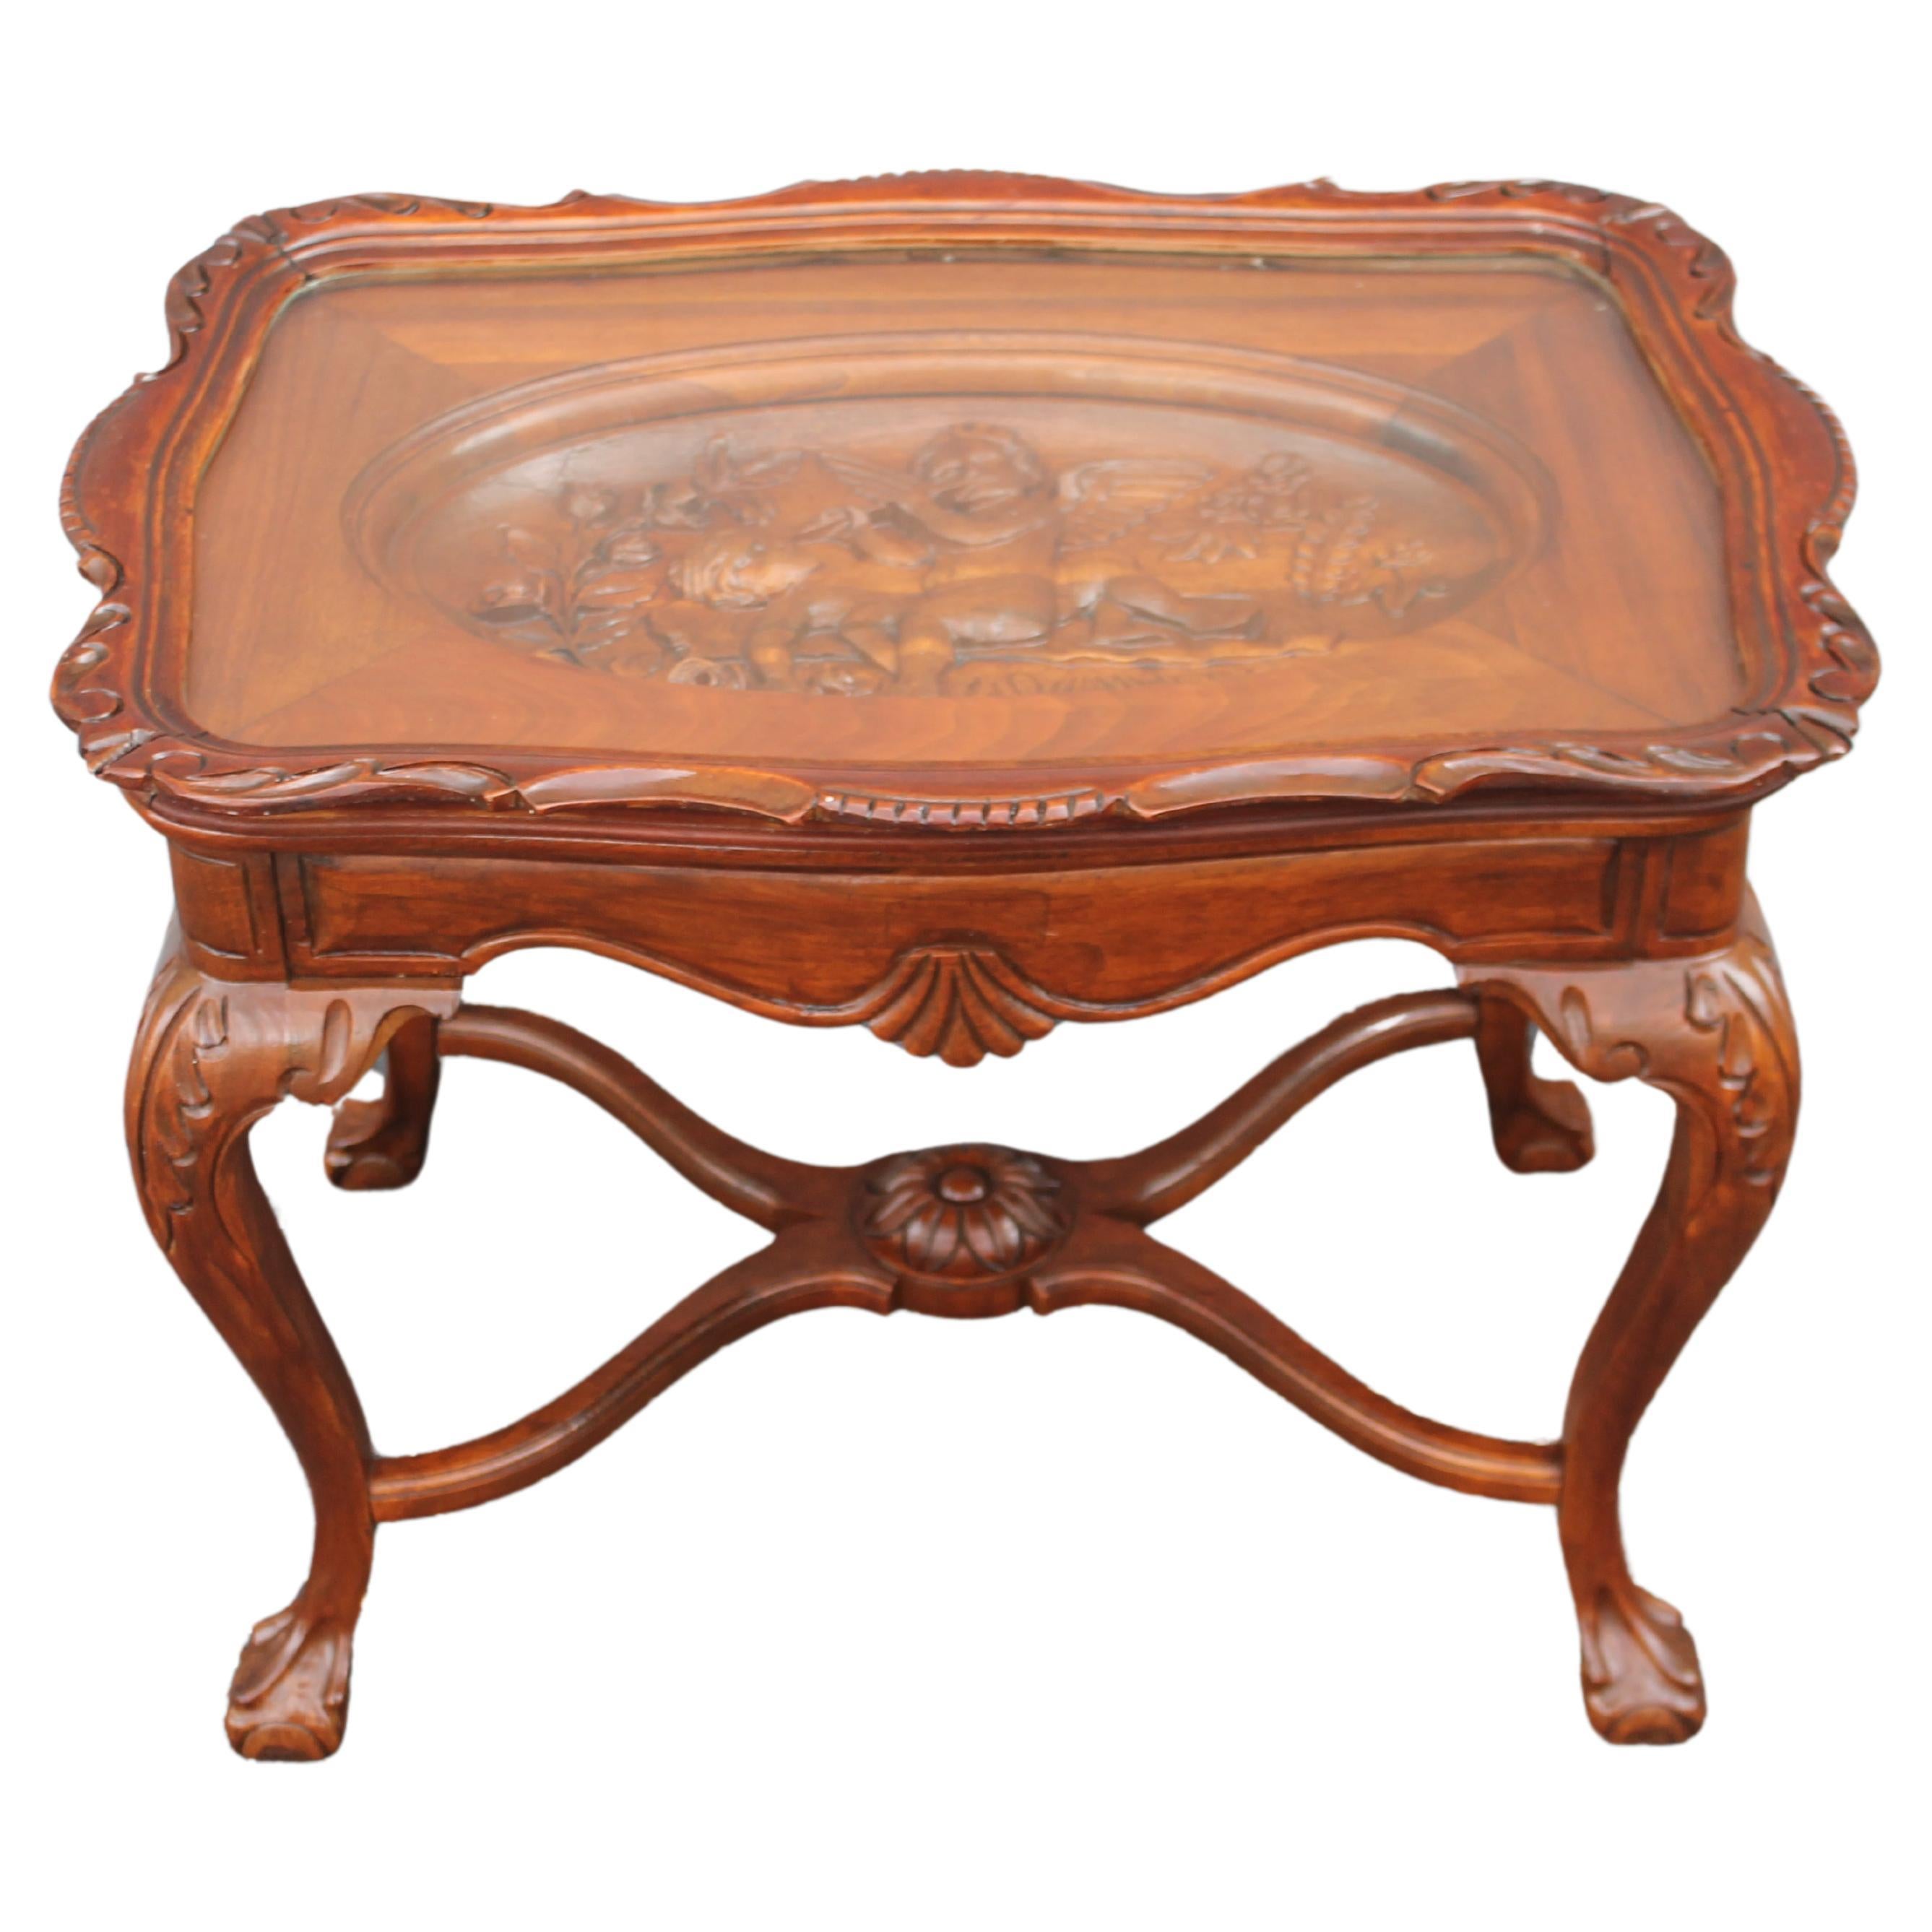 1940's Traditional style Carved Cherub Wood Tray Table